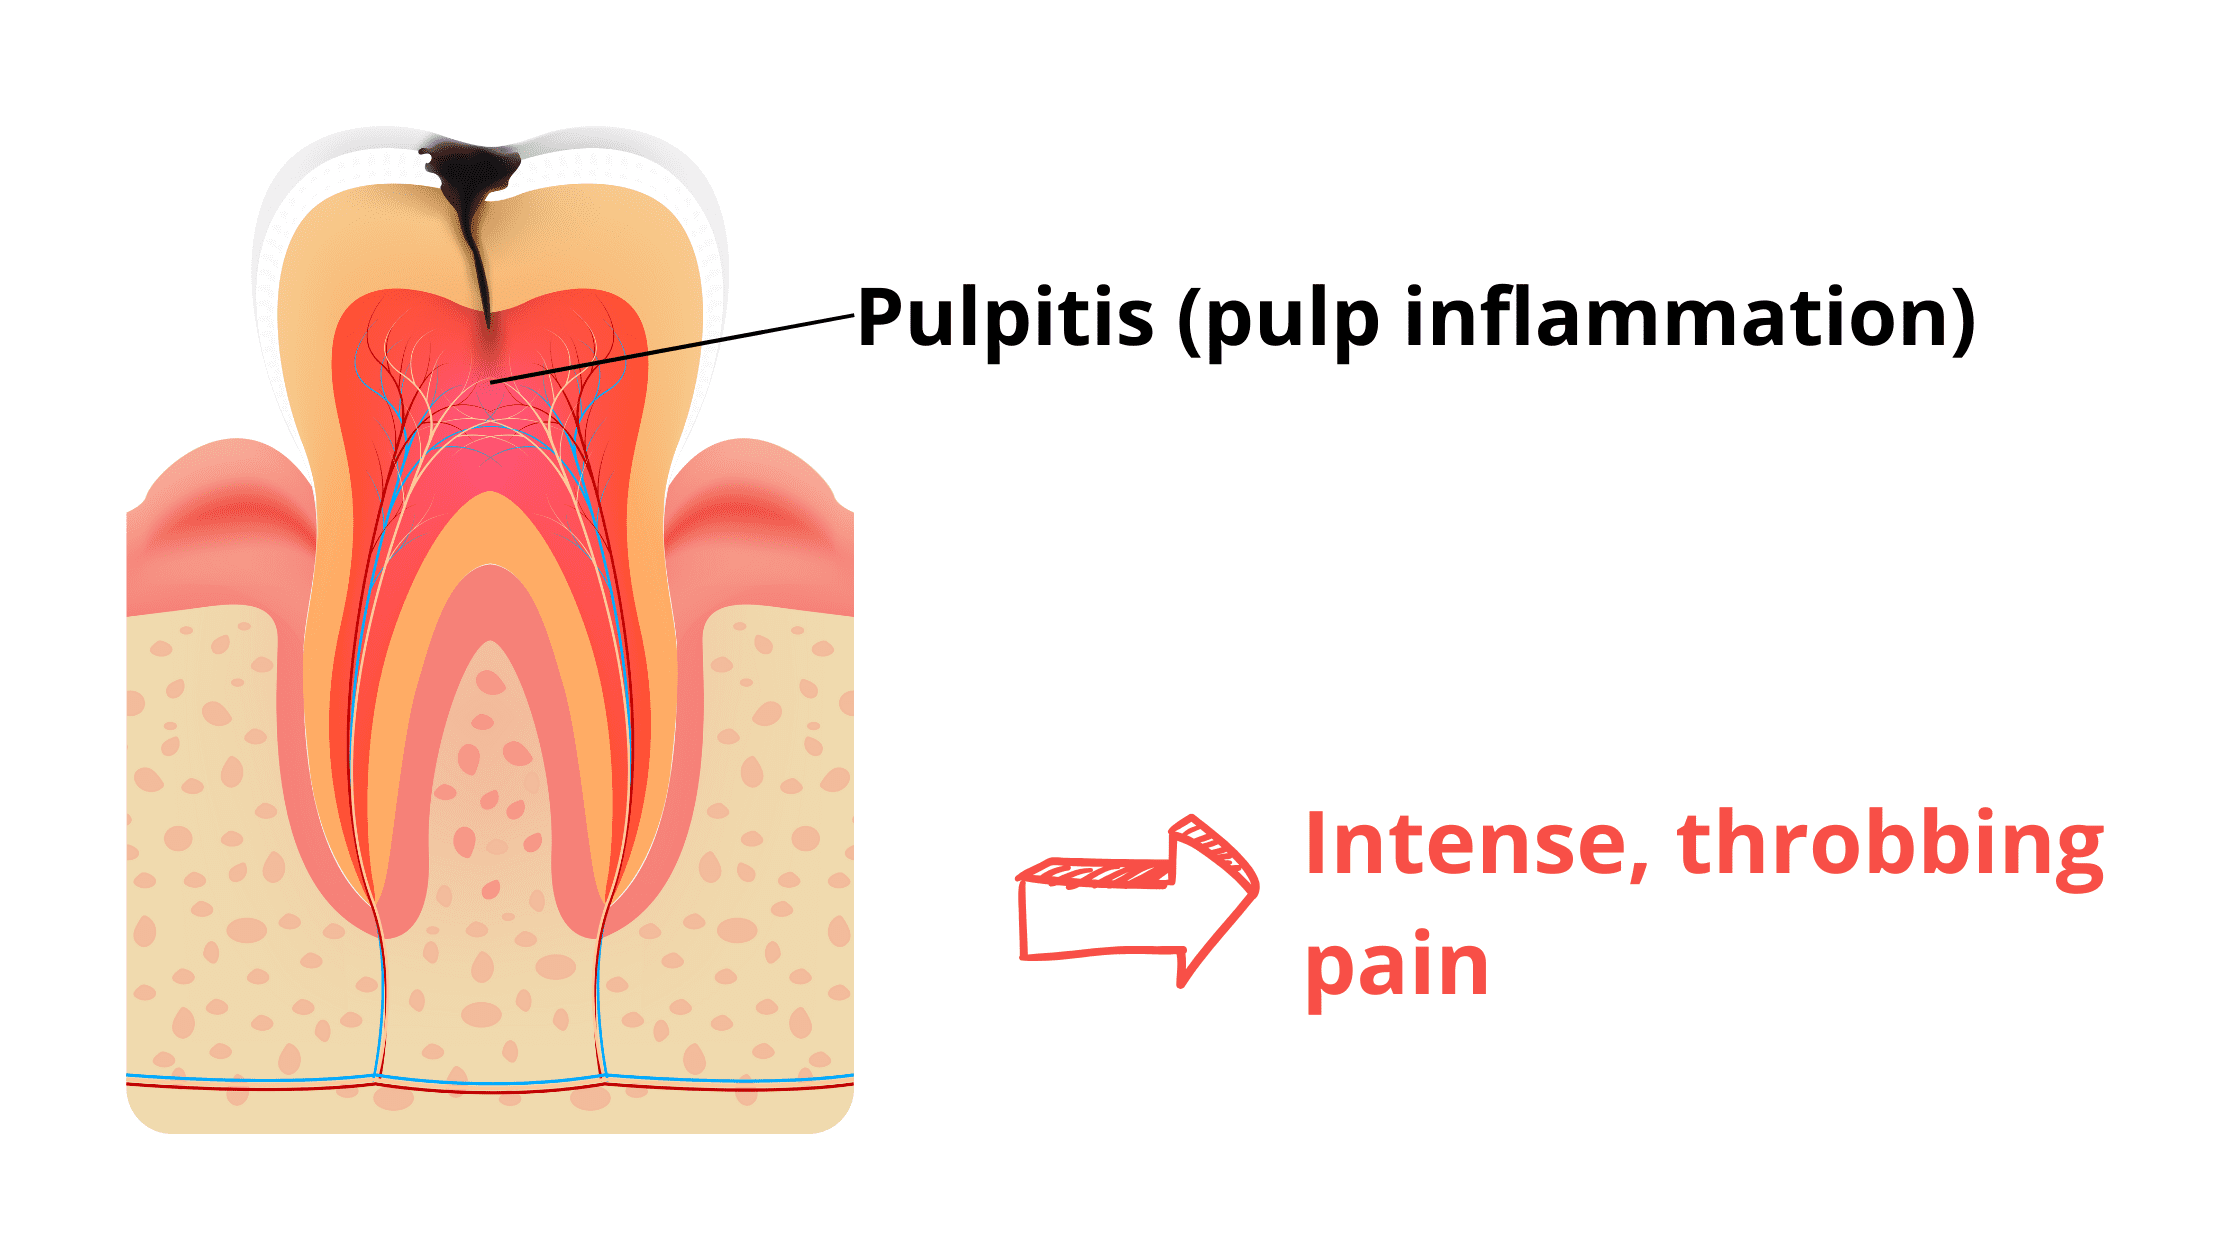 Pulpitis, or inflammation of the pulp, is a painful complication when the cavity reaches the pulp.